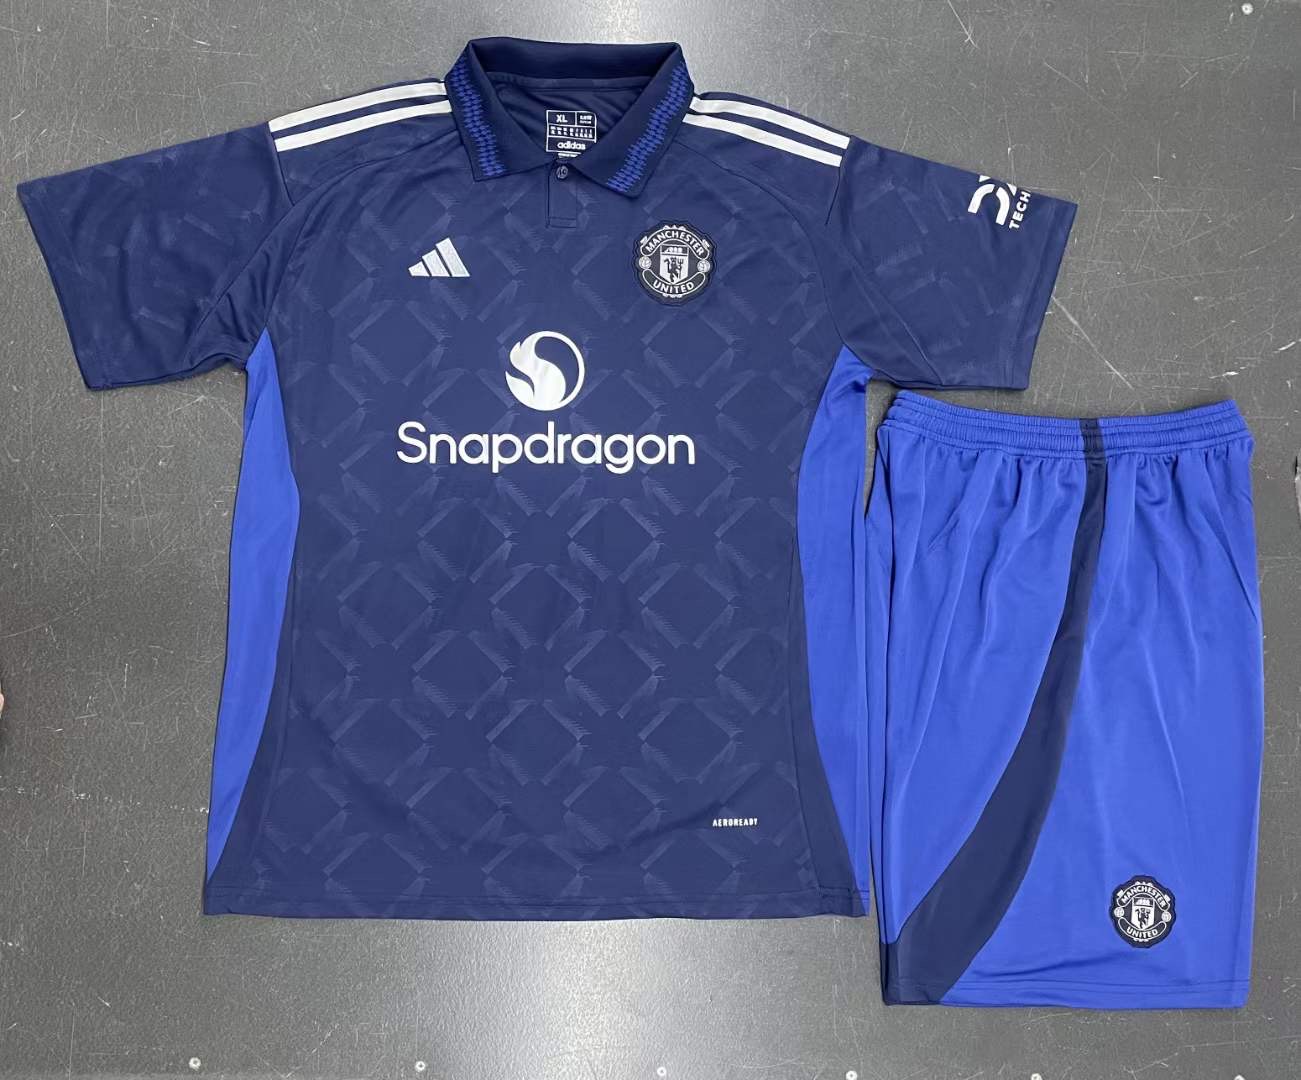 Manchester United Away 24/25 jersey with Shorts